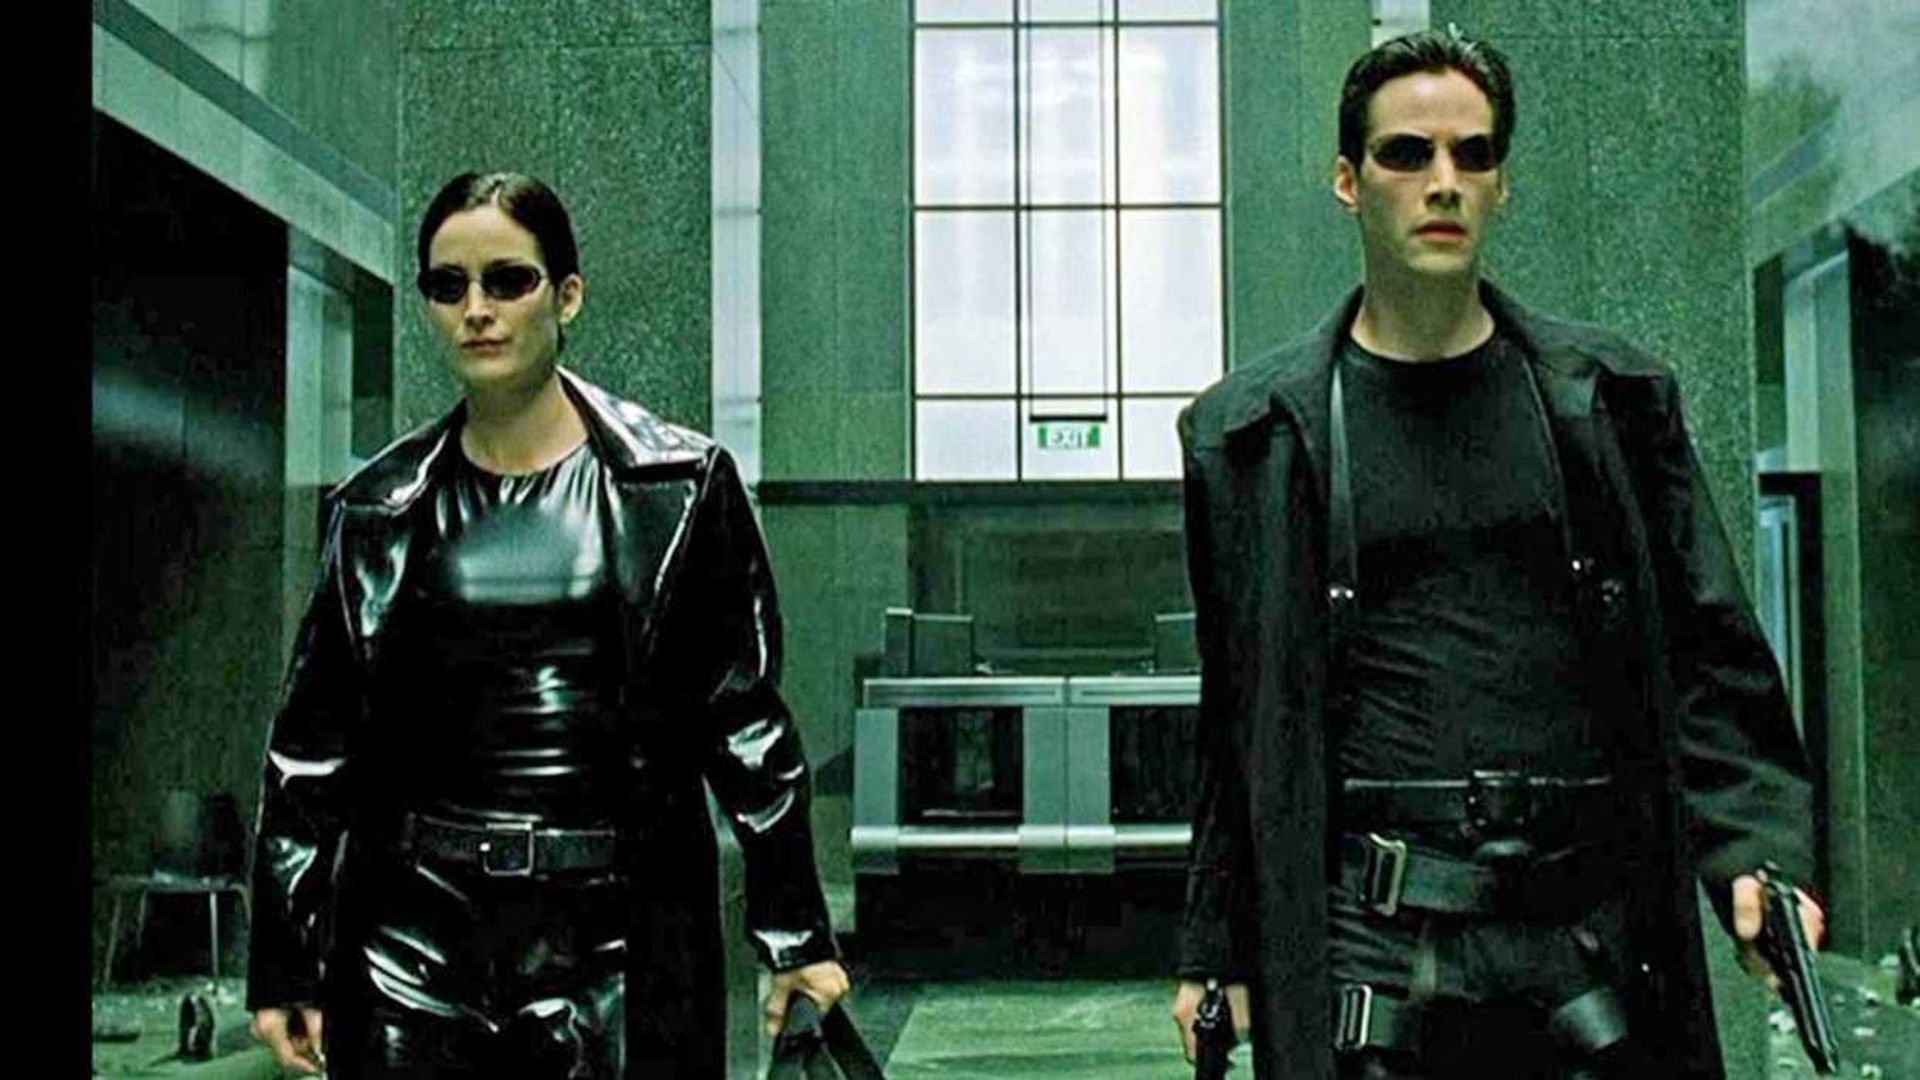 Art of the Cut: Behind the Scenes of The Matrix Resurrections